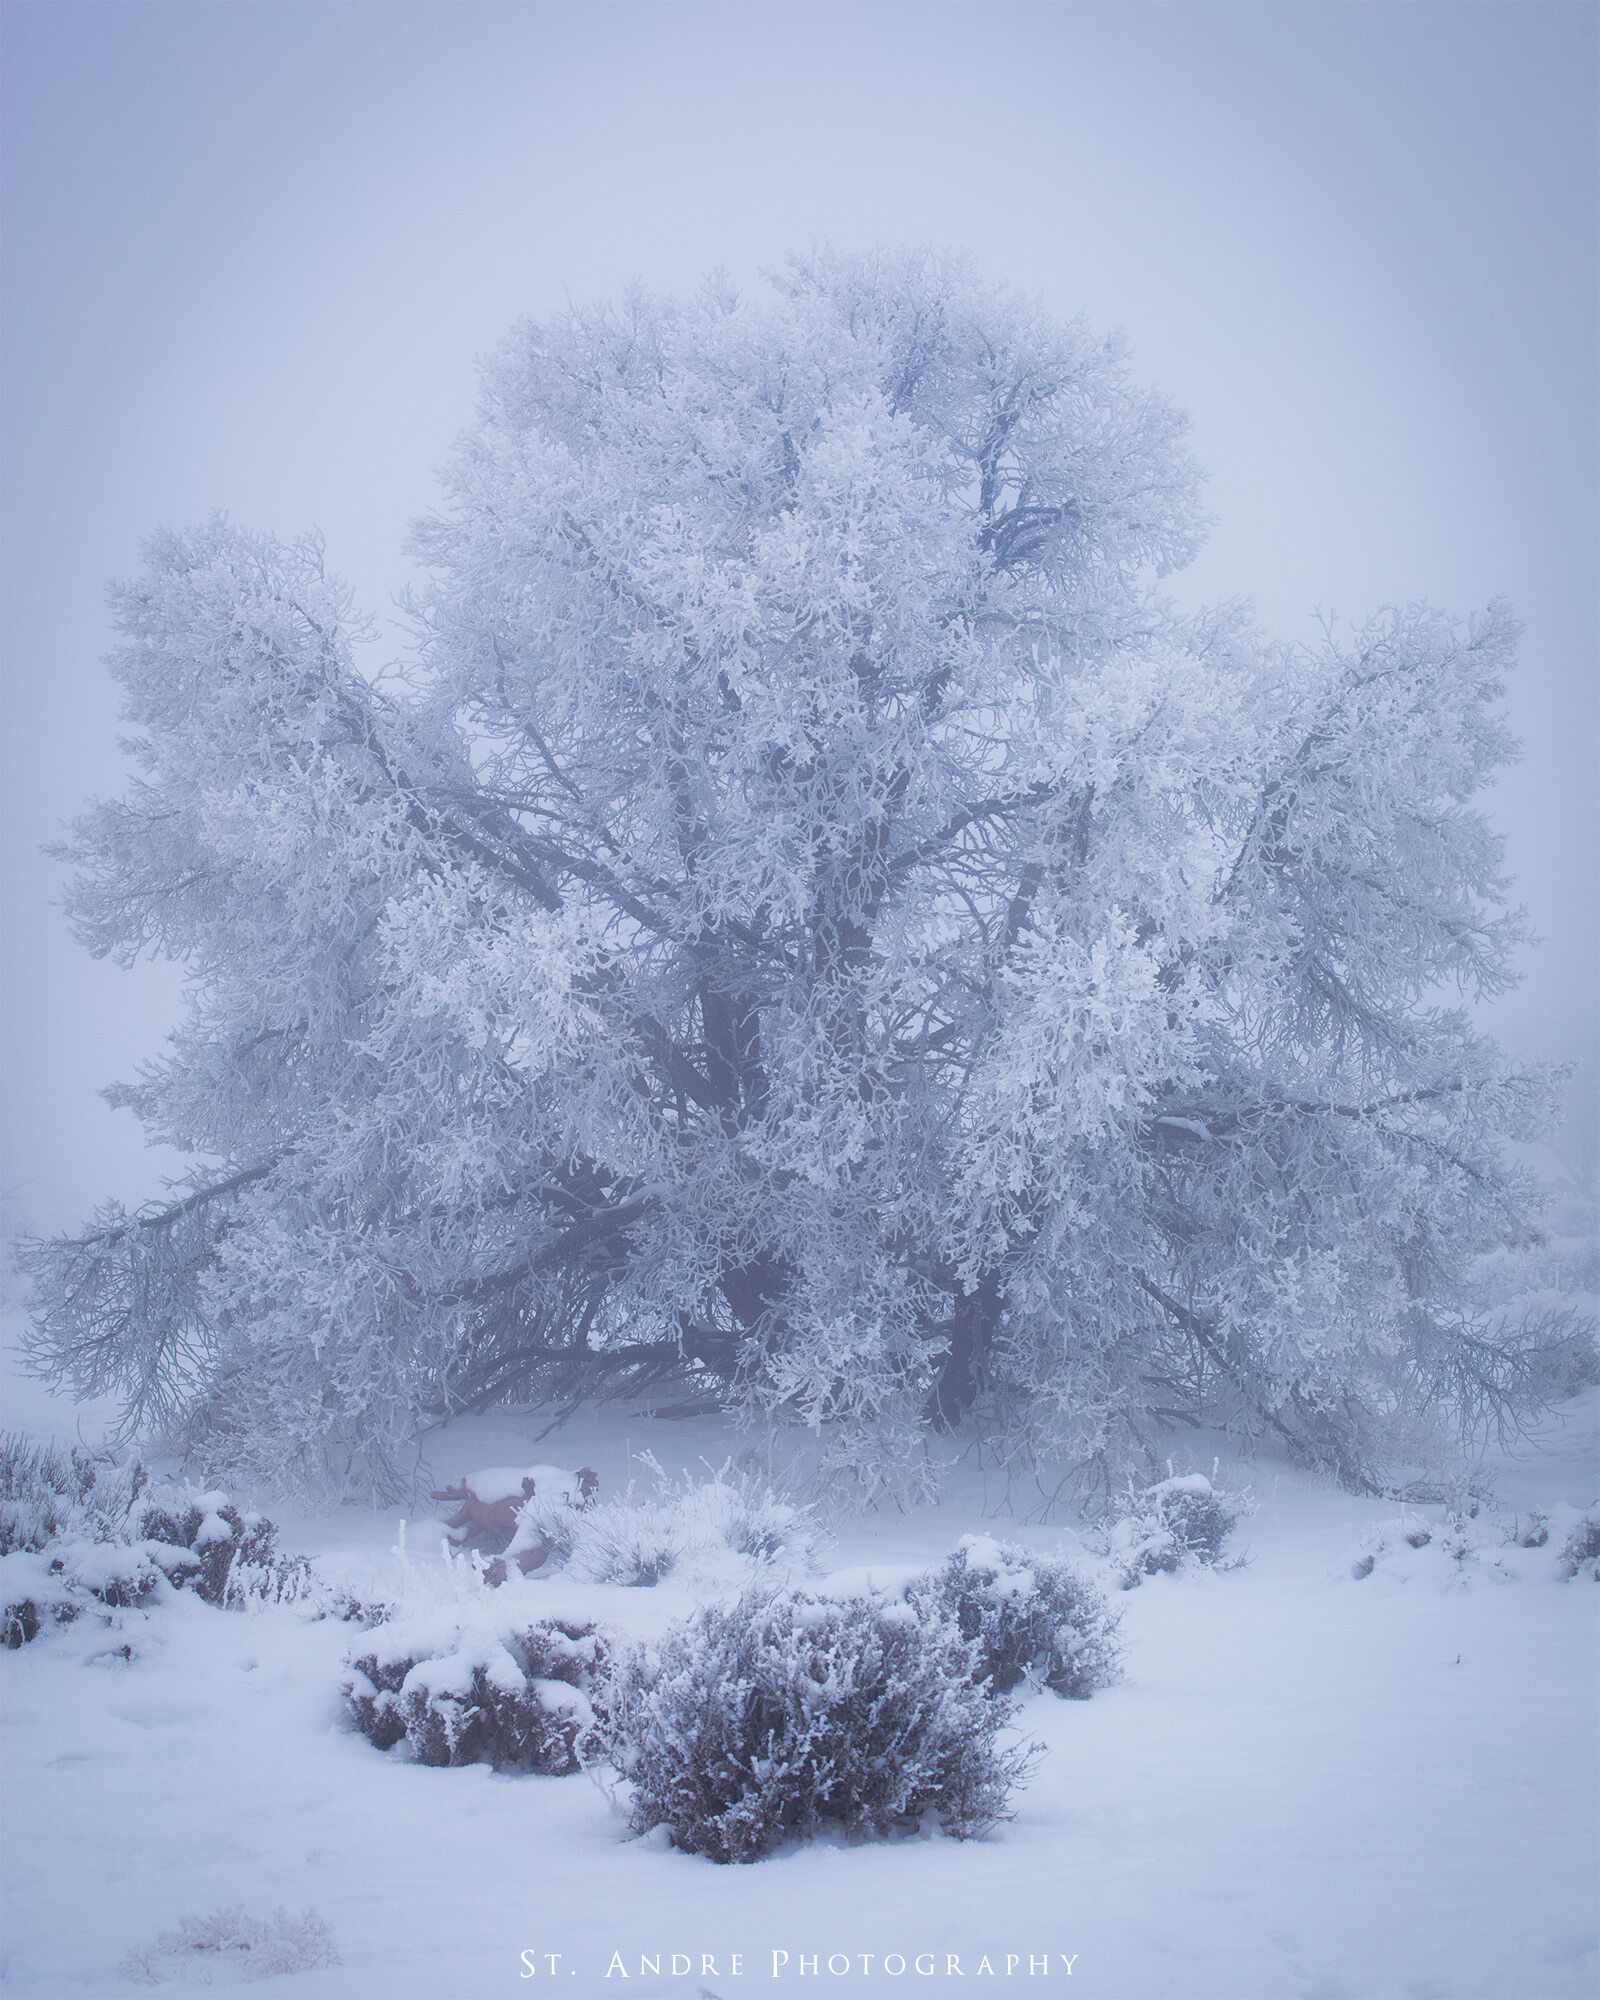 Hoar frost sticks to a tree with heavy set fog blocking all visible view of anything else. 